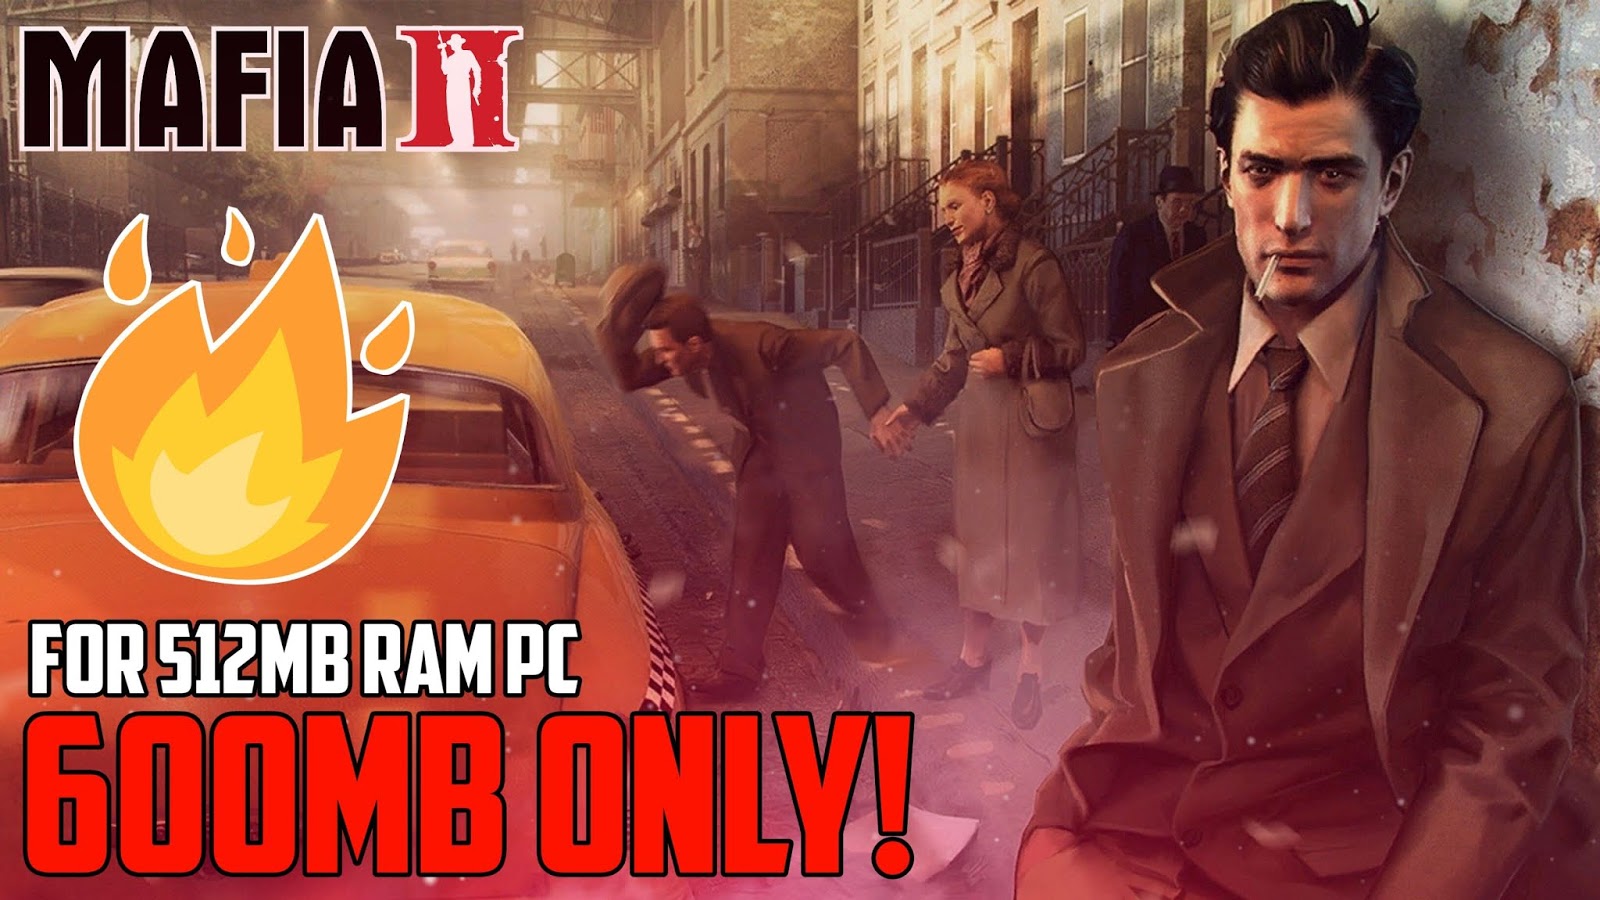 Mafia 2 Highly Compressed For 2GB RAM PC in 600MB (with